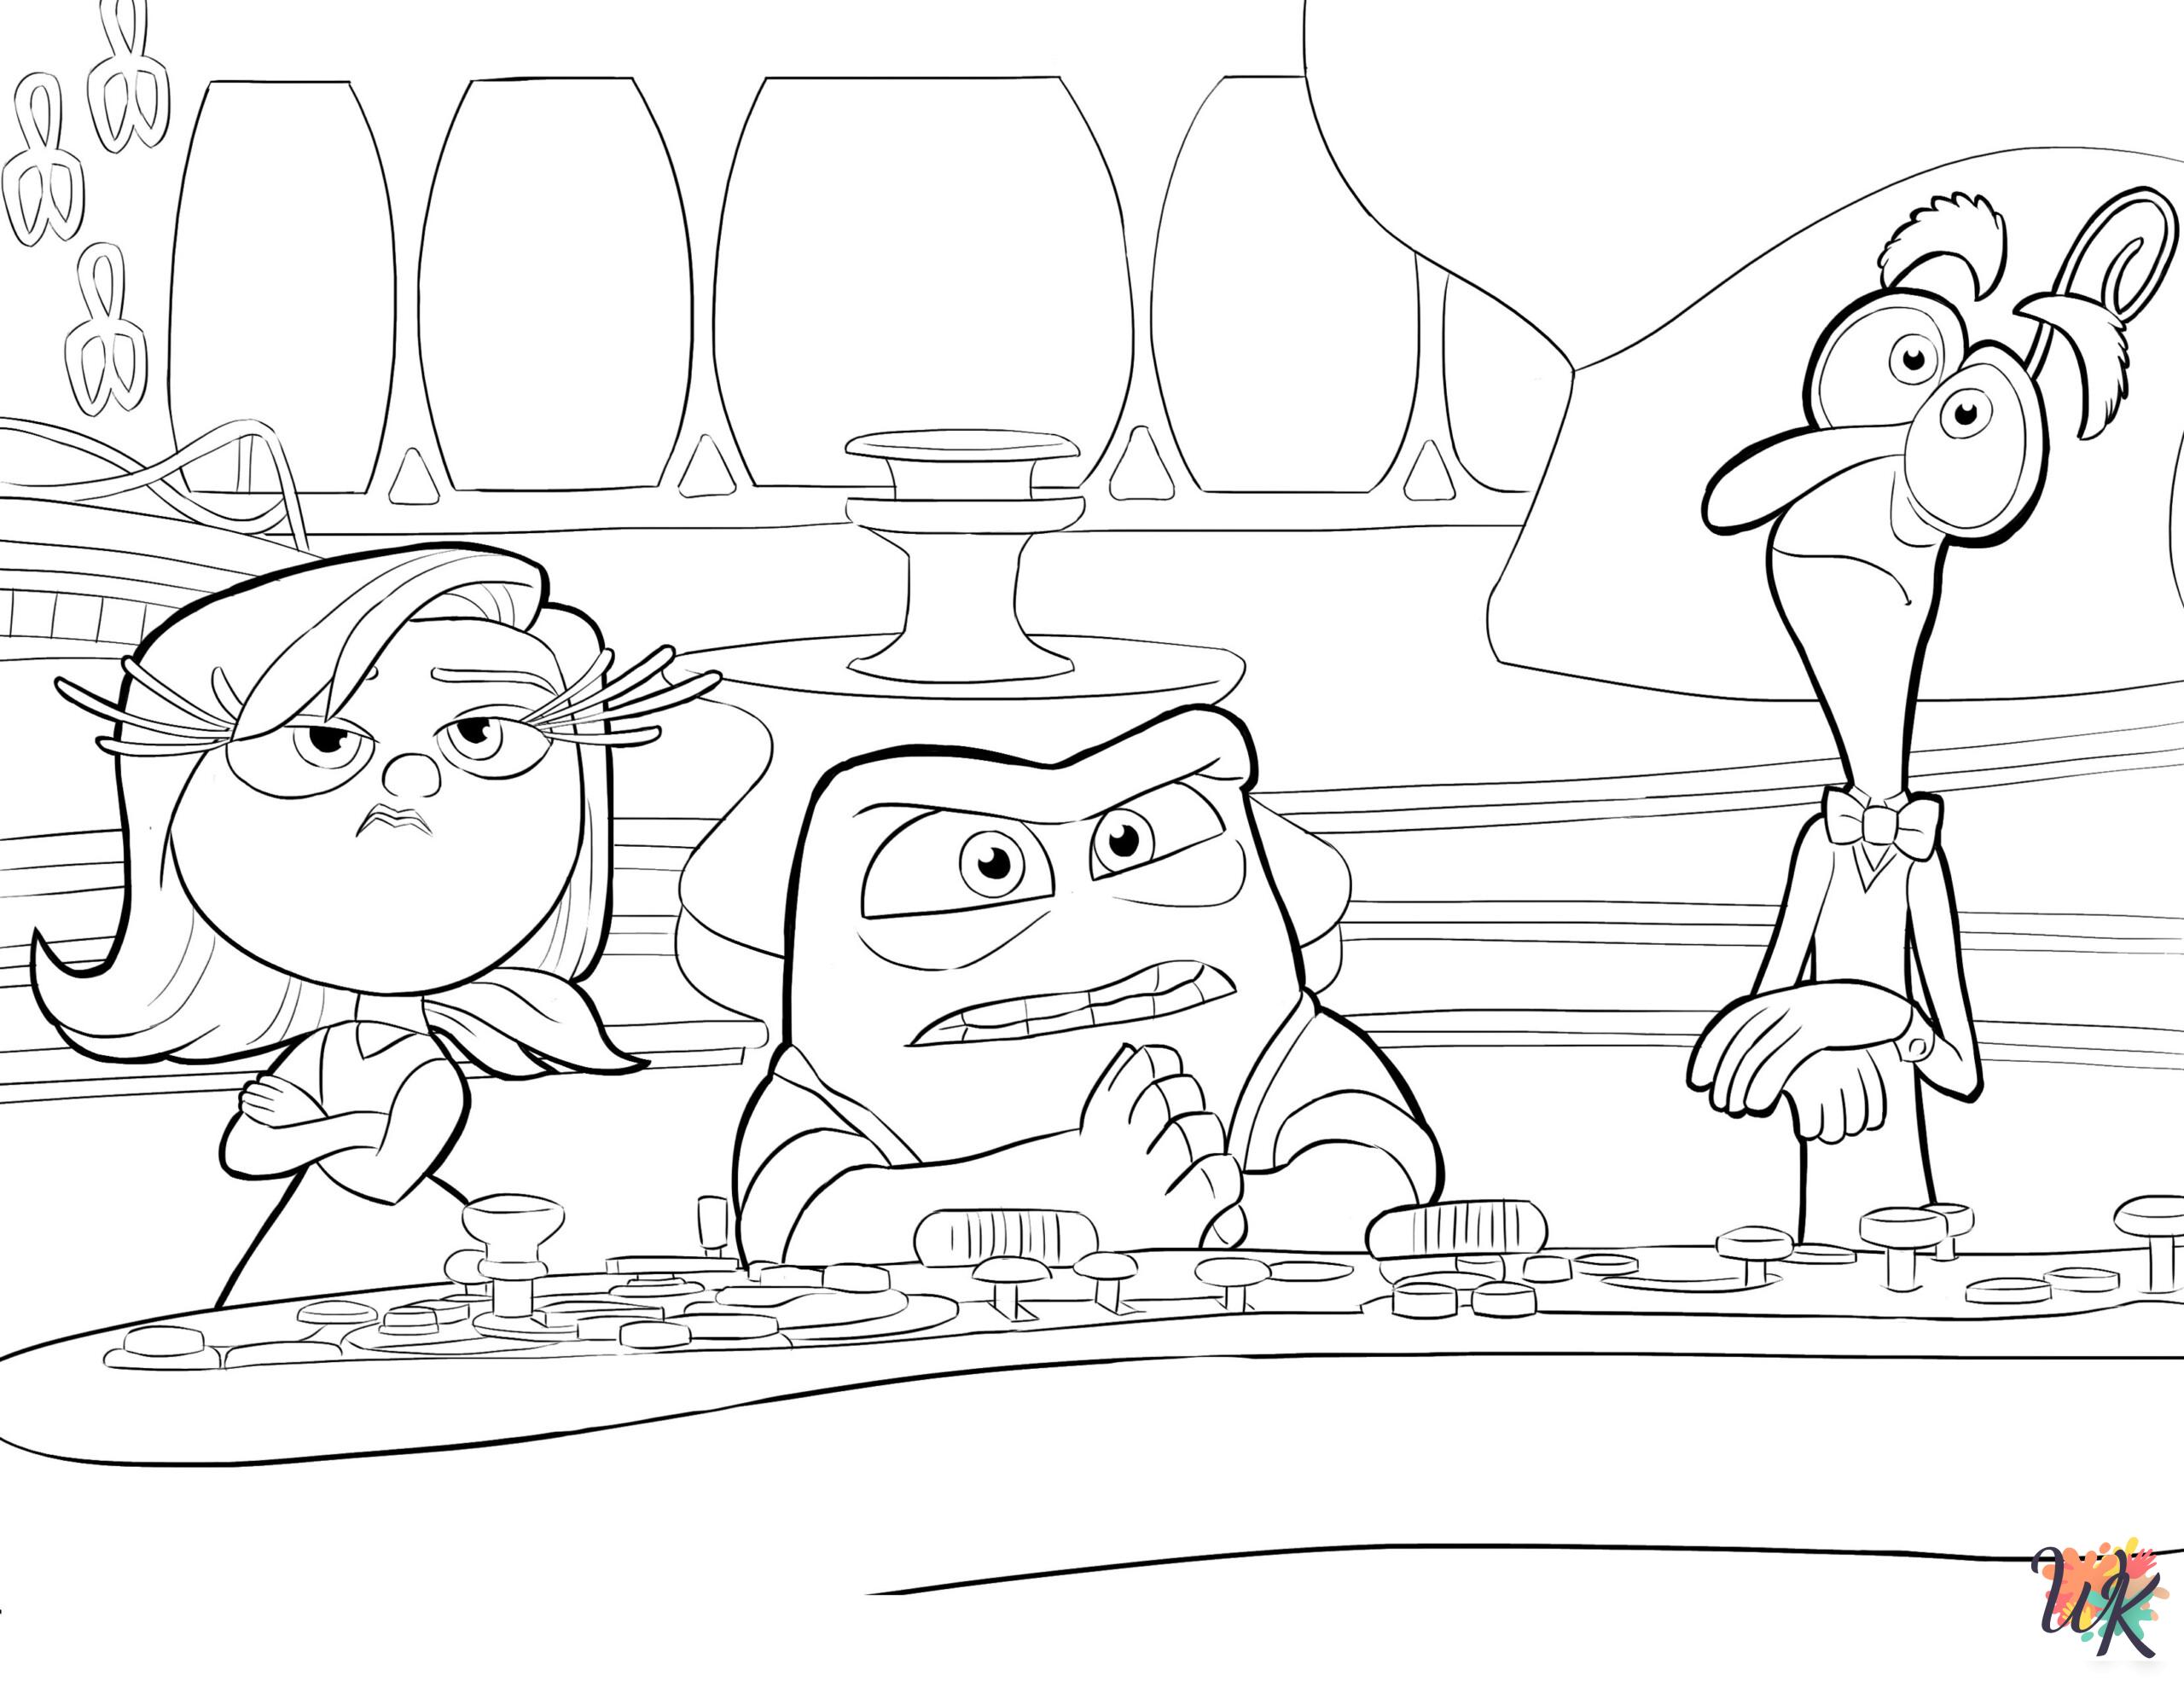 Inside Out cards coloring pages